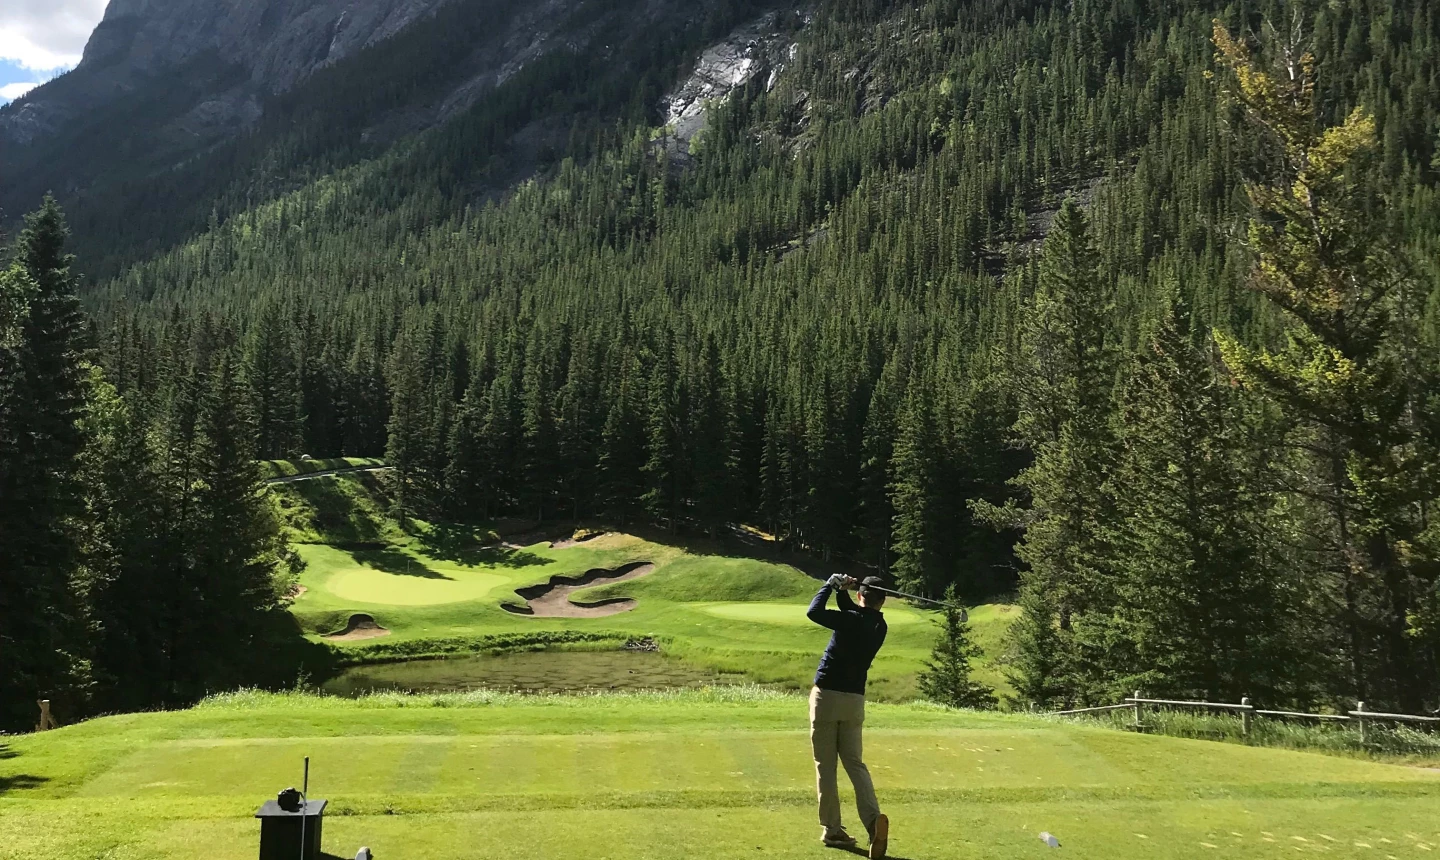 golfer hitting ball in moutains